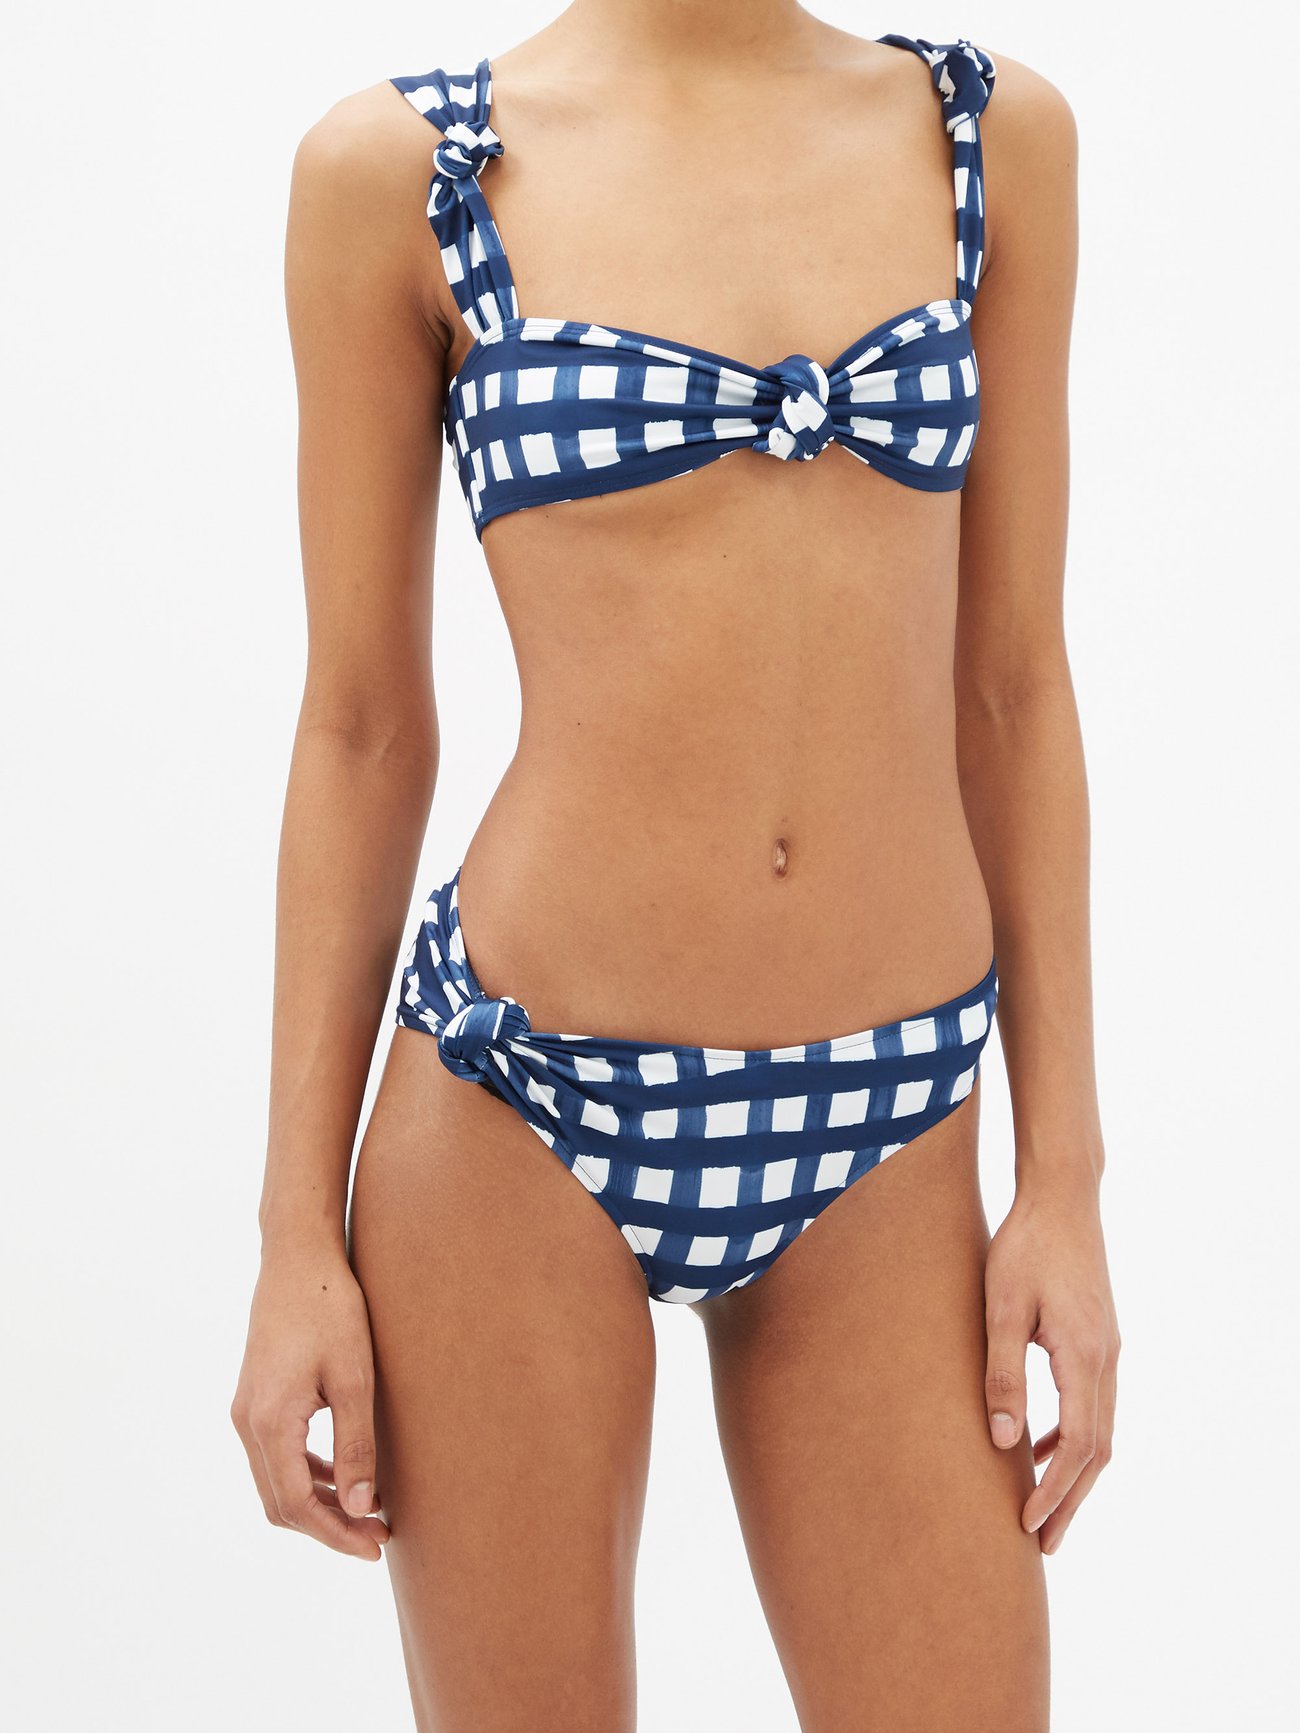 Jacquemus vichy tie knot navy and white check bikini top. Wide straps with knot feature. Navy and white check. Lightweight check-print recycled-fibre stretch-jersey. Ties at the back. matching pant available. 